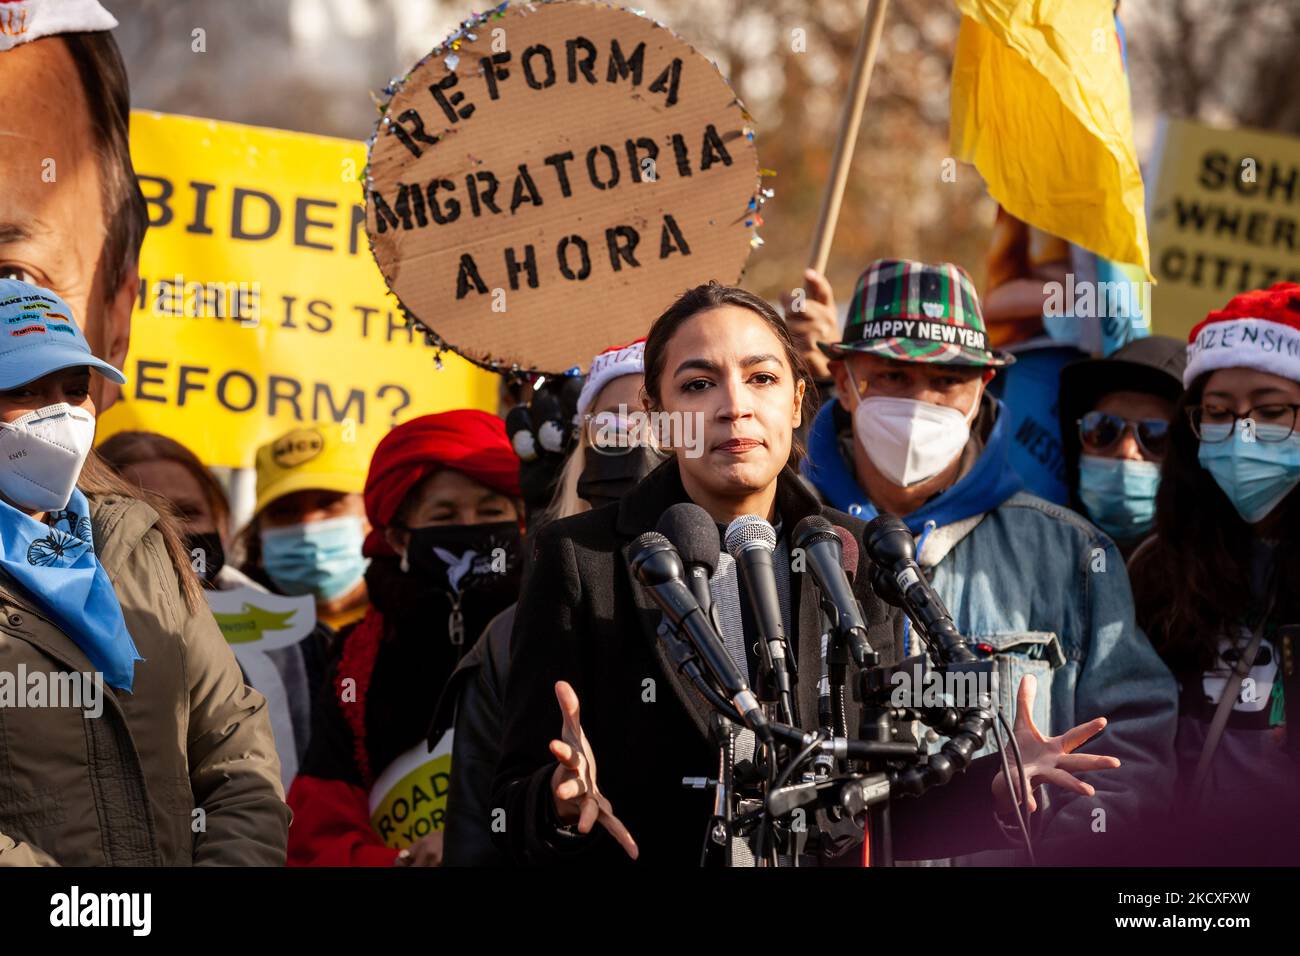 Congresswoman Alexandria Ocasio-Cortez speaks during a press conference with immigration activists, urging the Senate to pass a pathway to citizenship and the Build Back Better Act. This followed a protest in which demonstrators demand a pathway to citizenship, child care subsidies, green jobs, Medicare expansion, and infrastructure plans. Thousands came from around the United States to attend the rally. (Photo by Allison Bailey/NurPhoto) Stock Photo